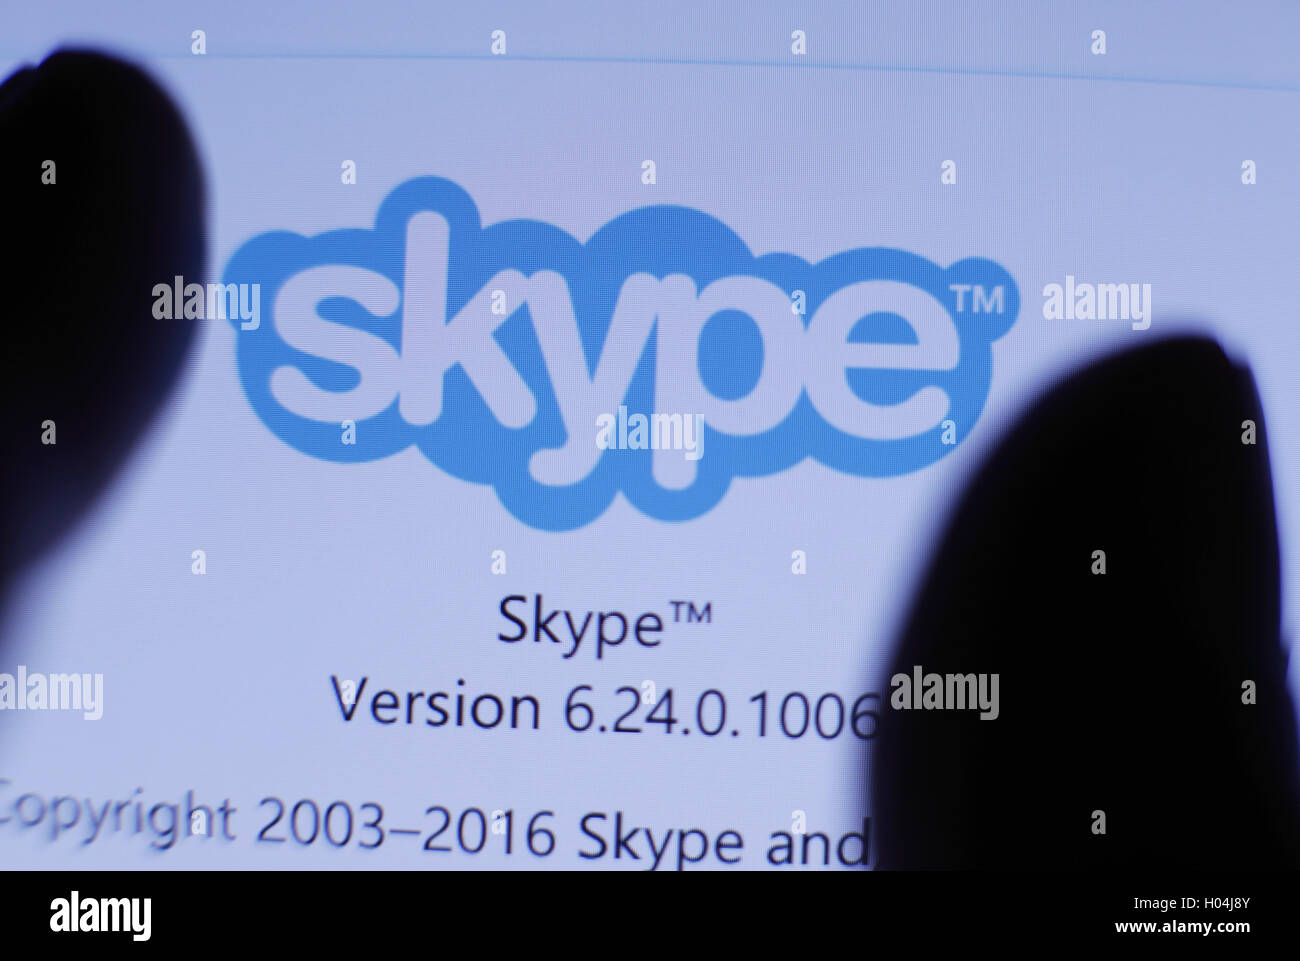 The Skype app on a tablet screen, as Microsoft - which purchased the company in May 2011 - is set to close the London office of its Skype subsidiary. Stock Photo